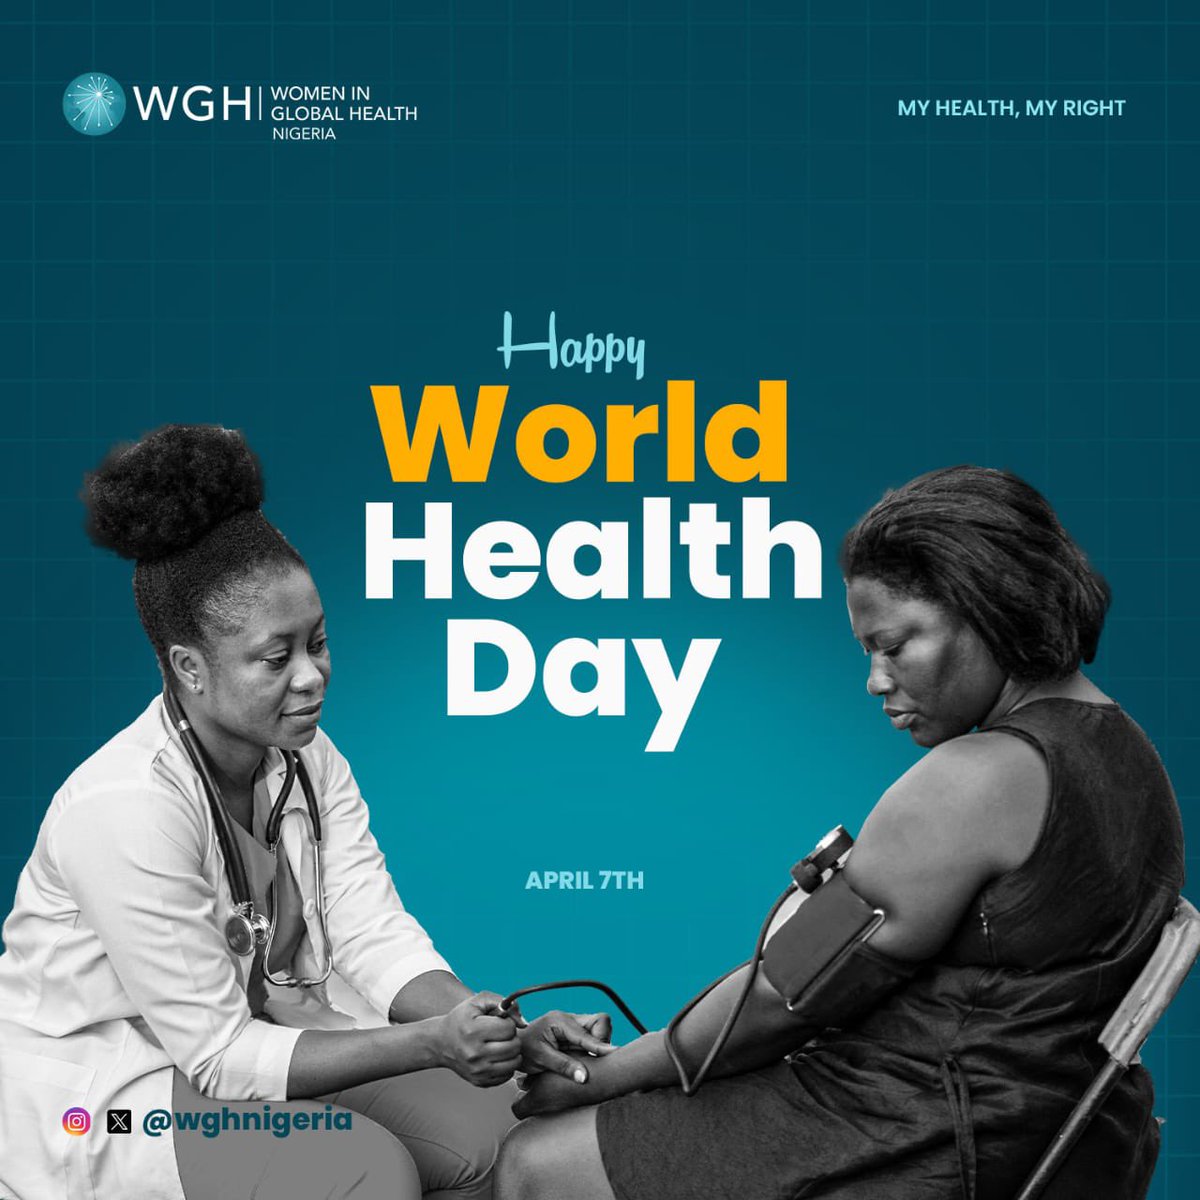 Join us on this #WorldHealthDay as we celebrate the unsung heroes of global health: #communityhealthworkers. With dedication and sacrifice, they ensure that health care is a right, not a privilege, for everyone. Let’s invest in their vital work and strive for 'health for all.'